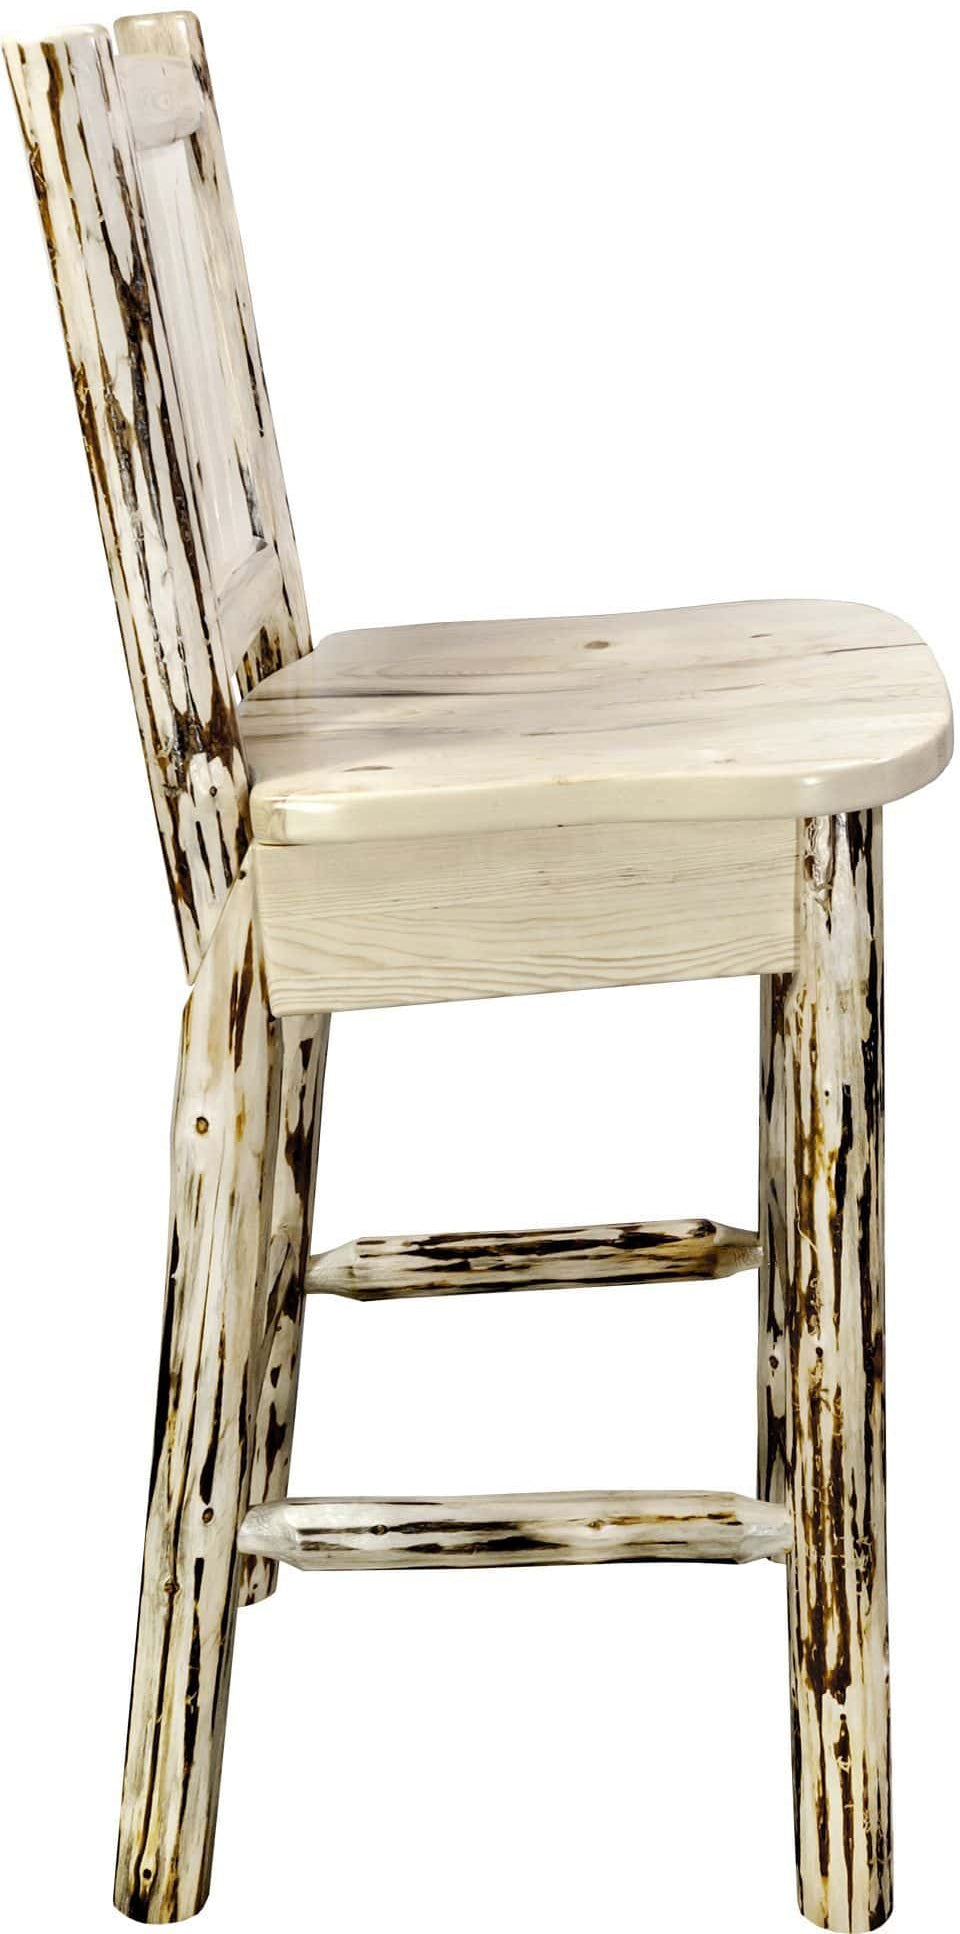 Montana Woodworks Montana Collection Counter Height Barstool with Back-Rustic Furniture Marketplace